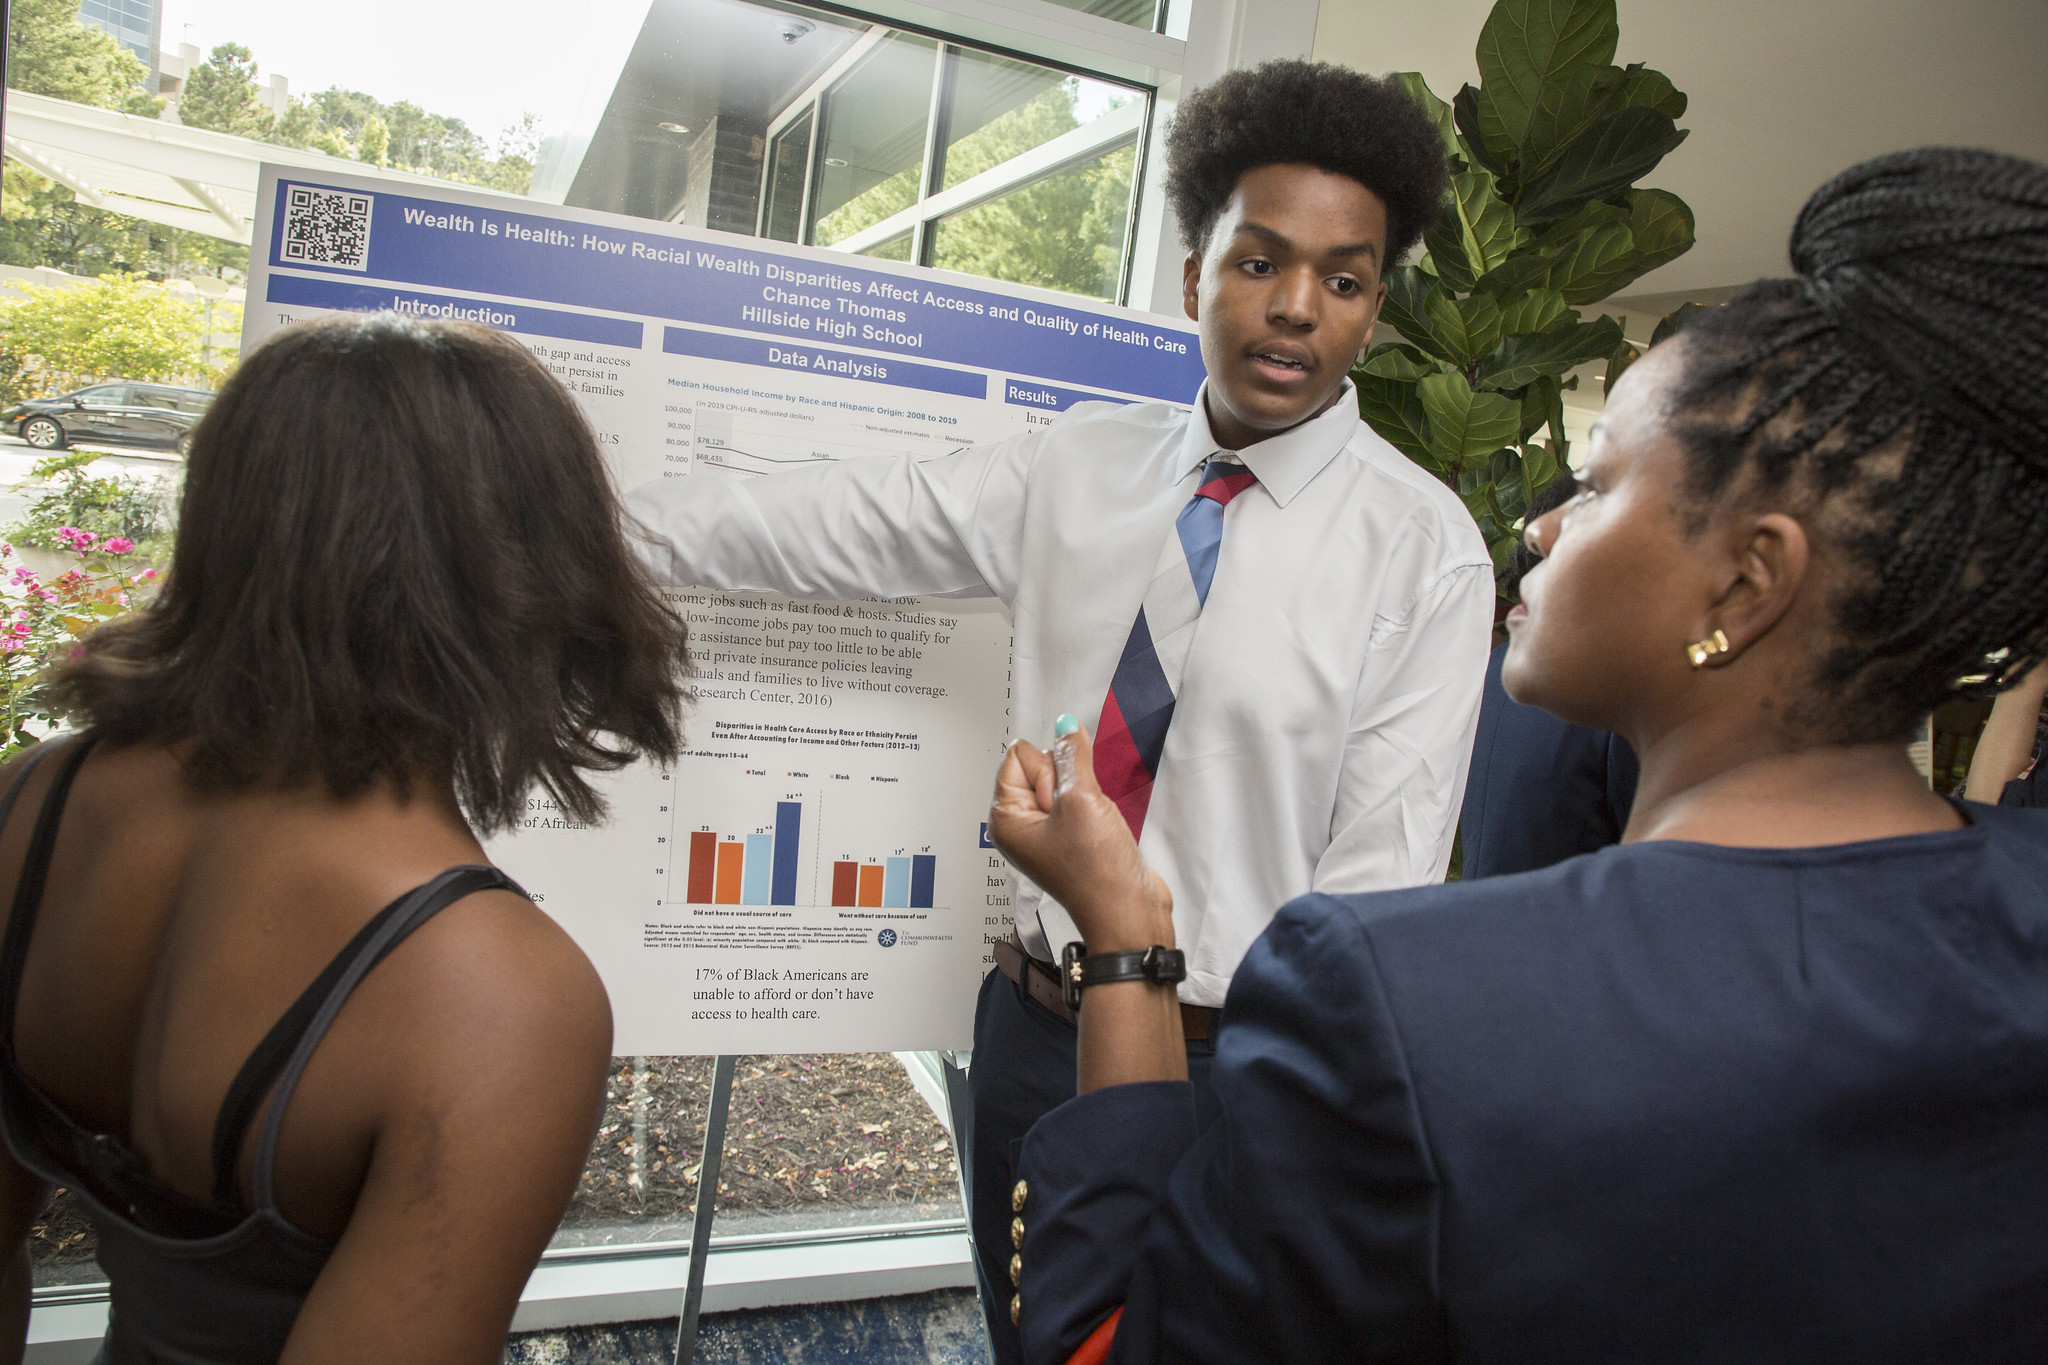 A young man participating in the Young Scholars program presents his research on a poster board to two people